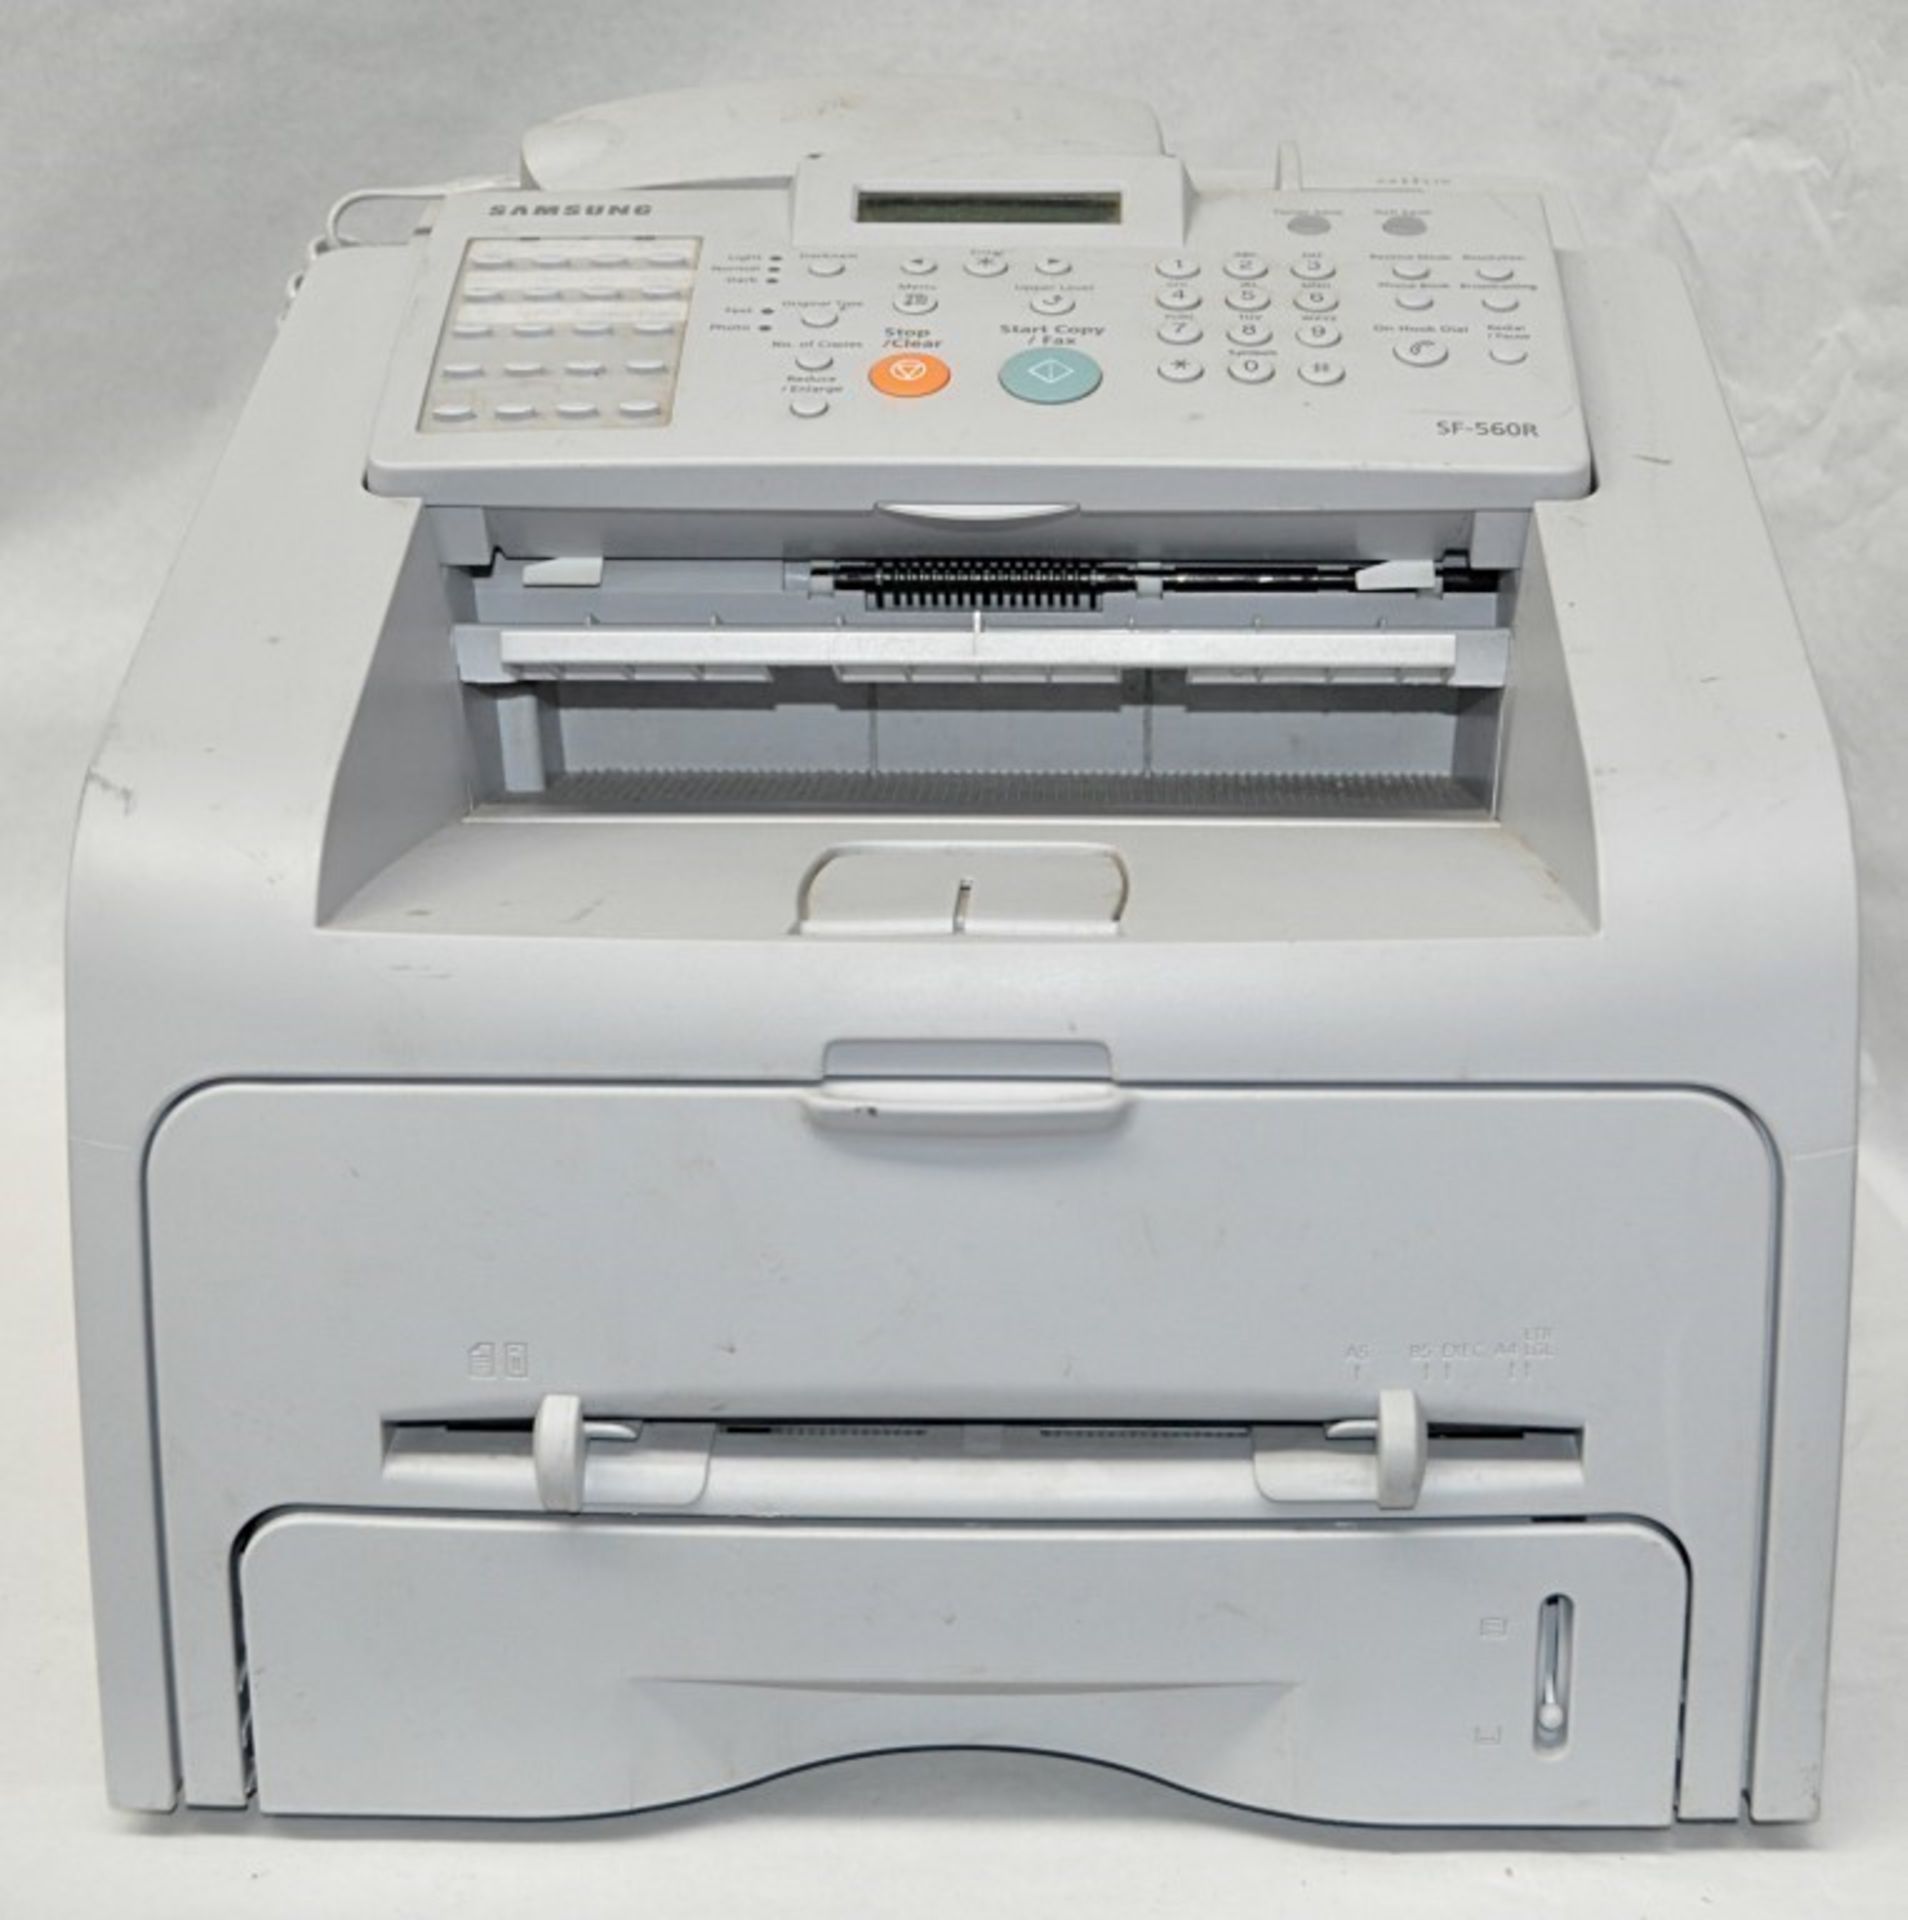 1 x Samsung SF-S60R Office Fax Machine / A4 Copier - Taken From A Working Office Environment - - Image 2 of 4